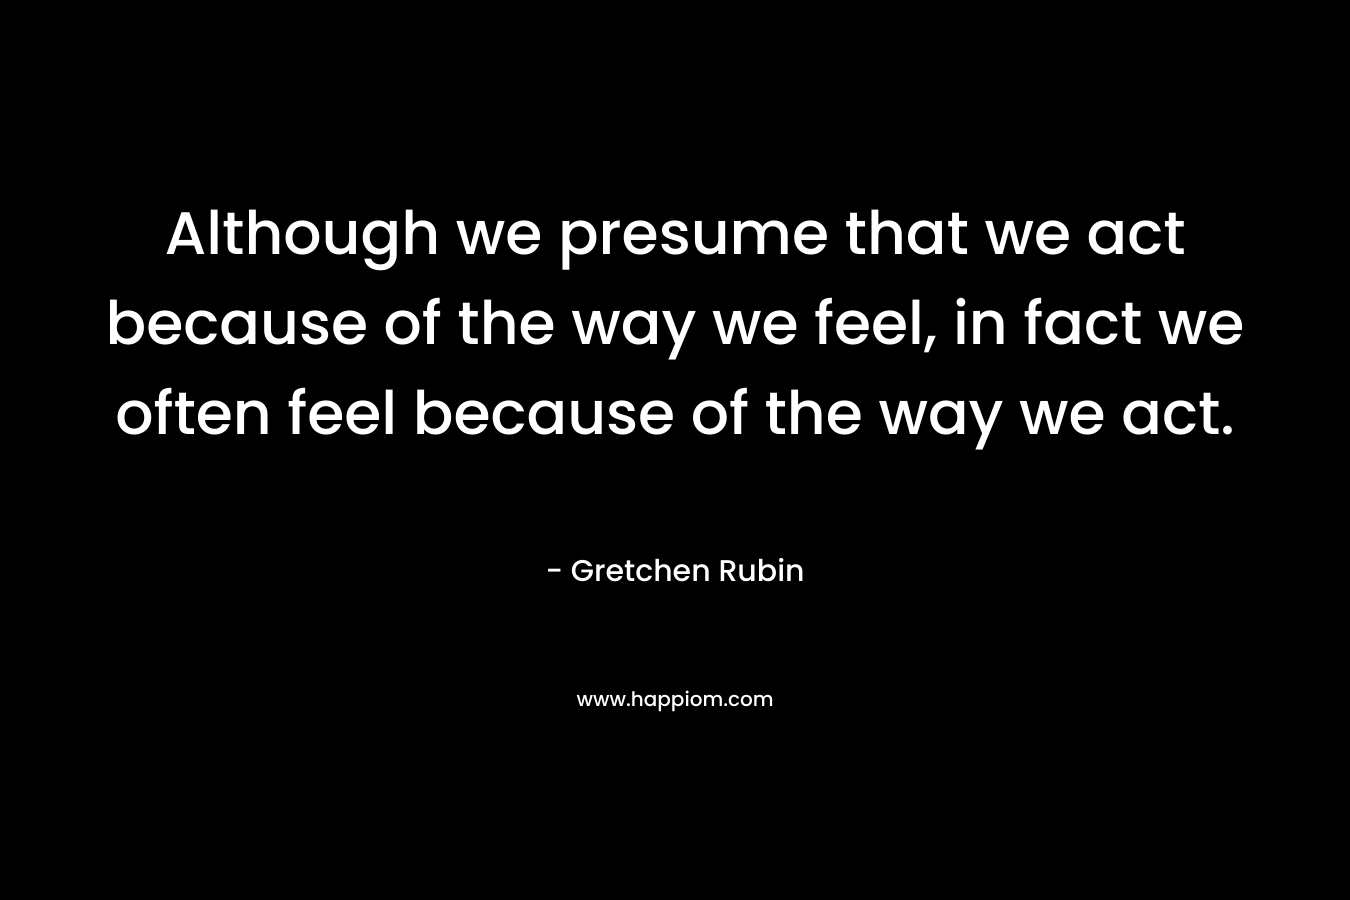 Although we presume that we act because of the way we feel, in fact we often feel because of the way we act. – Gretchen Rubin